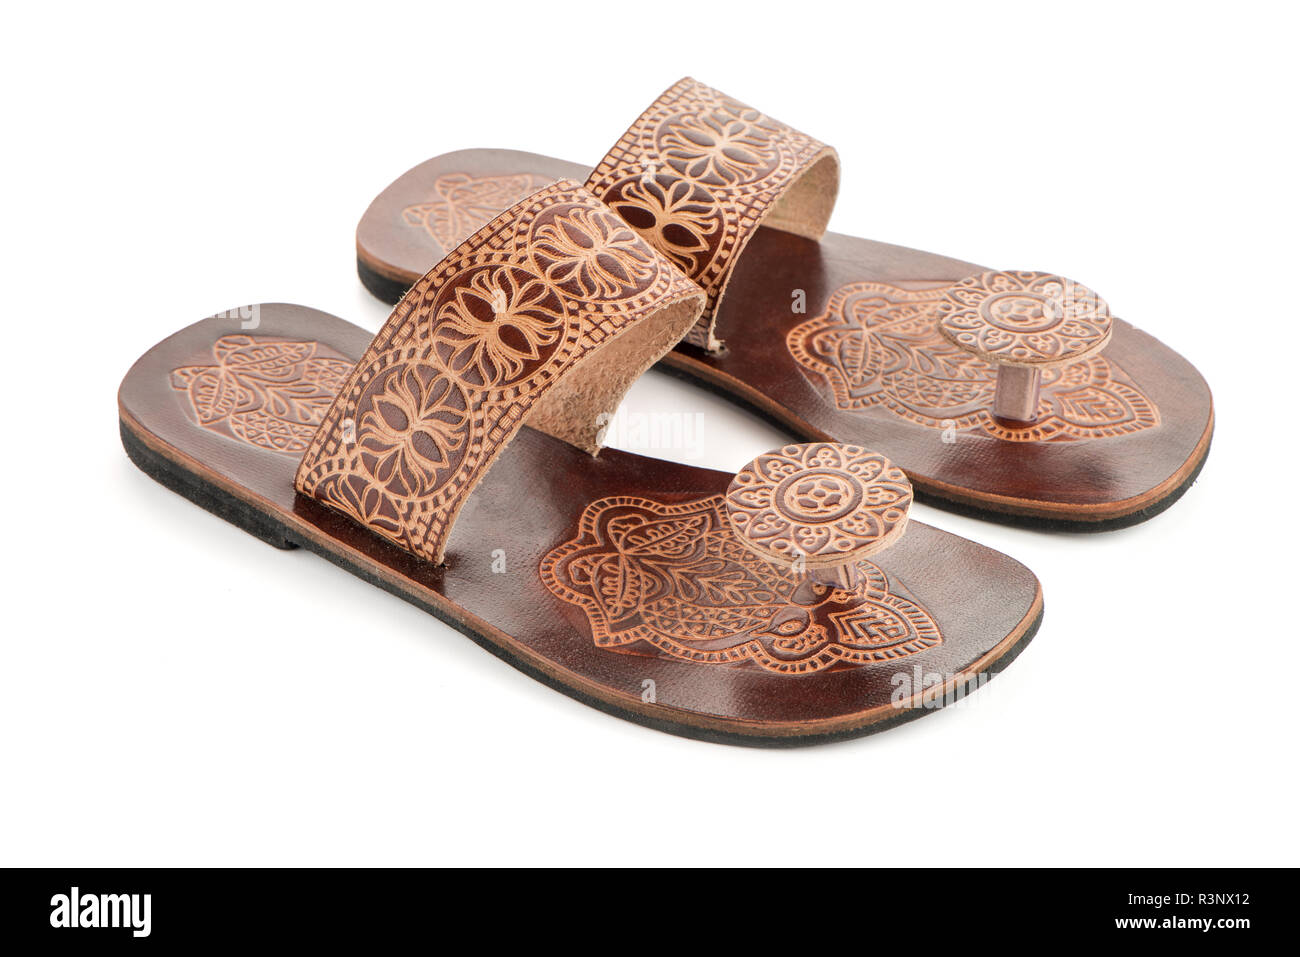 Leather women sandals of ethnic design from India Stock Photo - Alamy